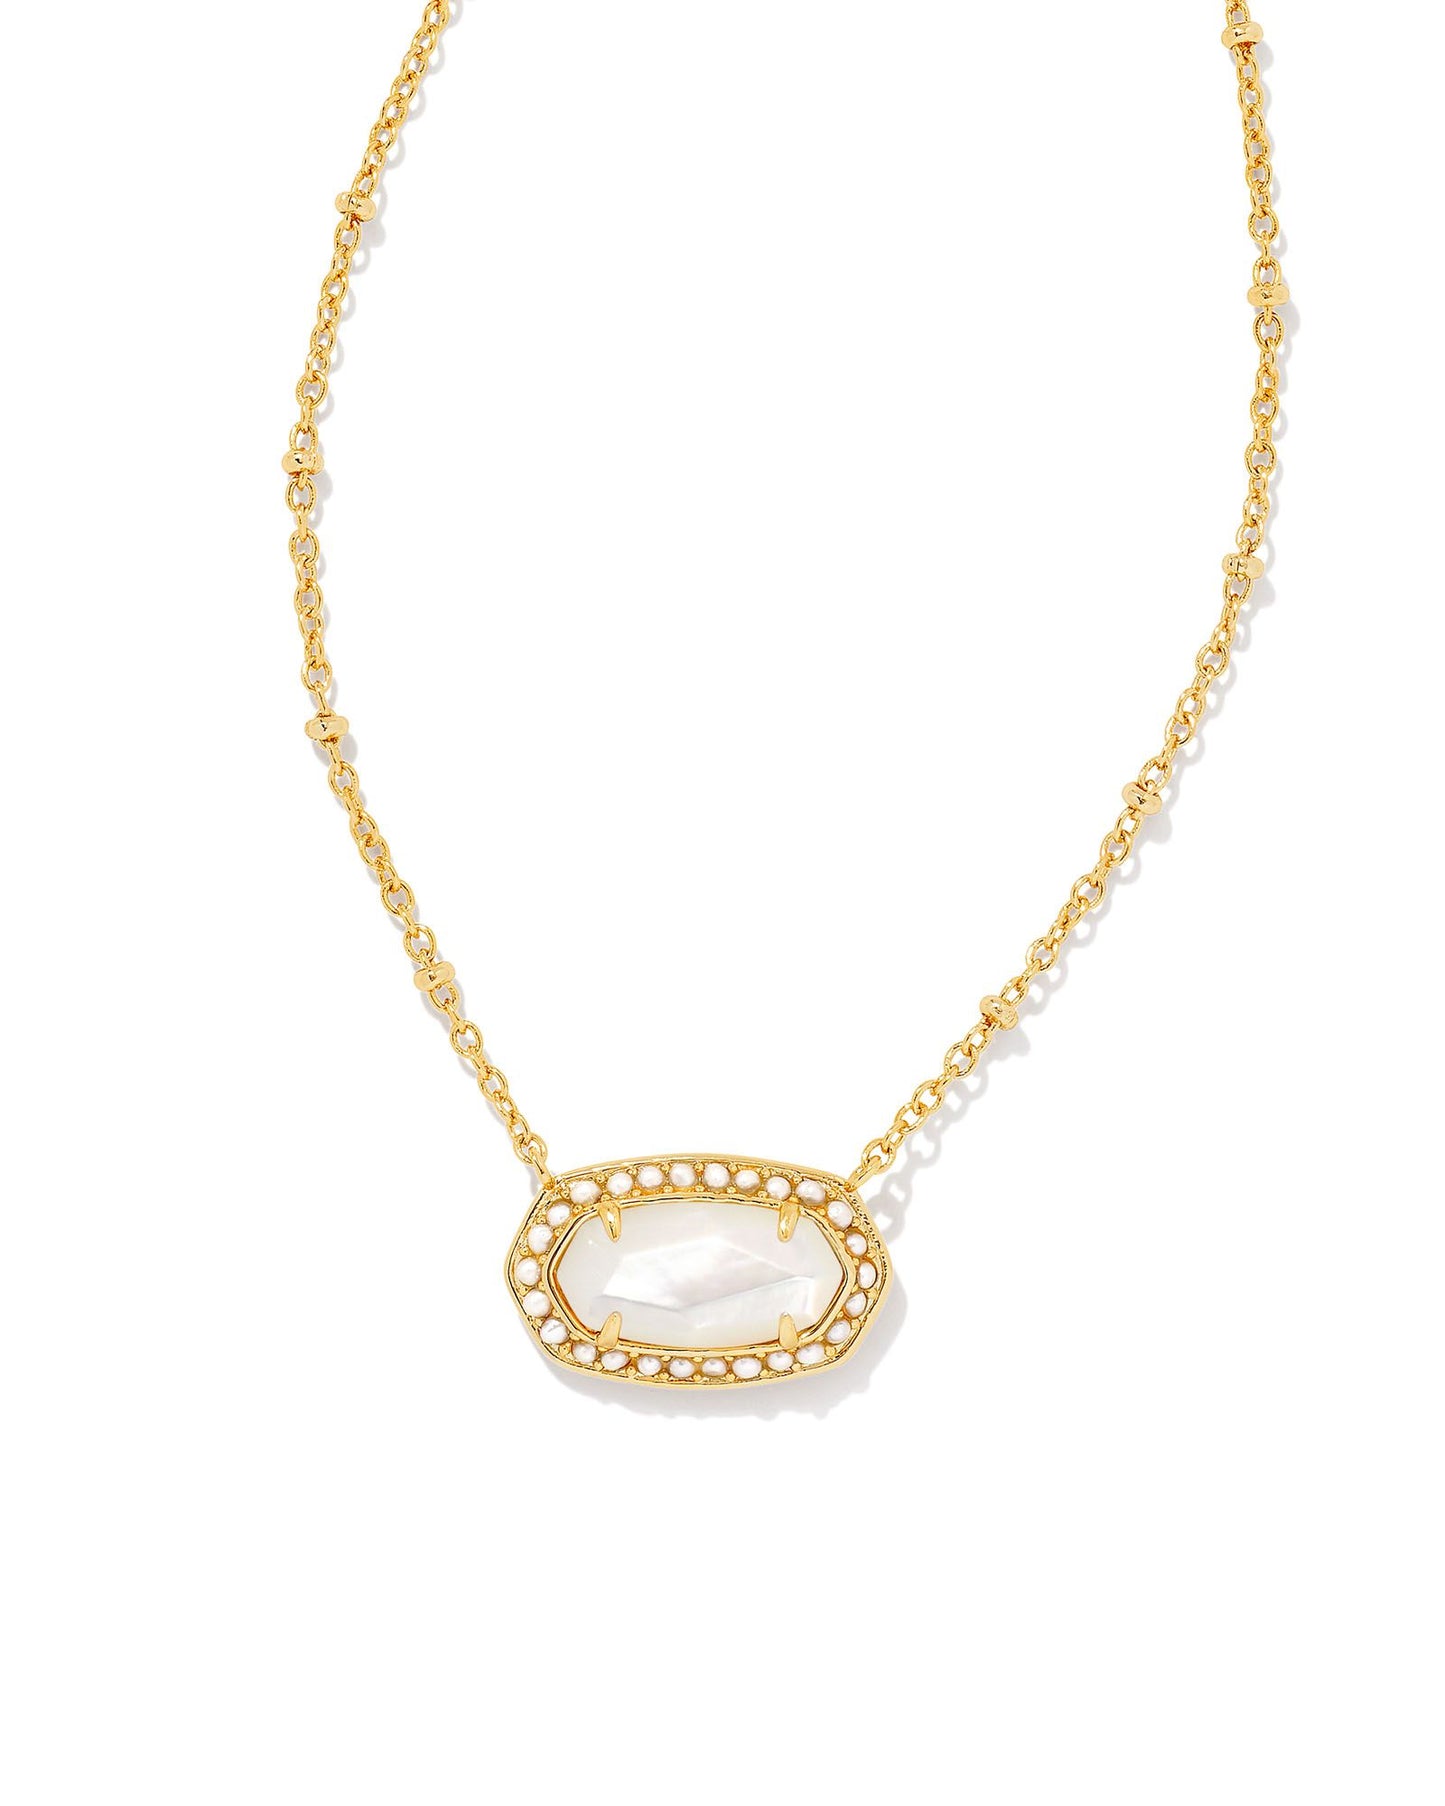 Kendra Scott Pearl Beaded Elisa Pendant Necklace in Ivory Mother-of-Pearl-Necklaces-Kendra Scott-N1854GLD-The Twisted Chandelier